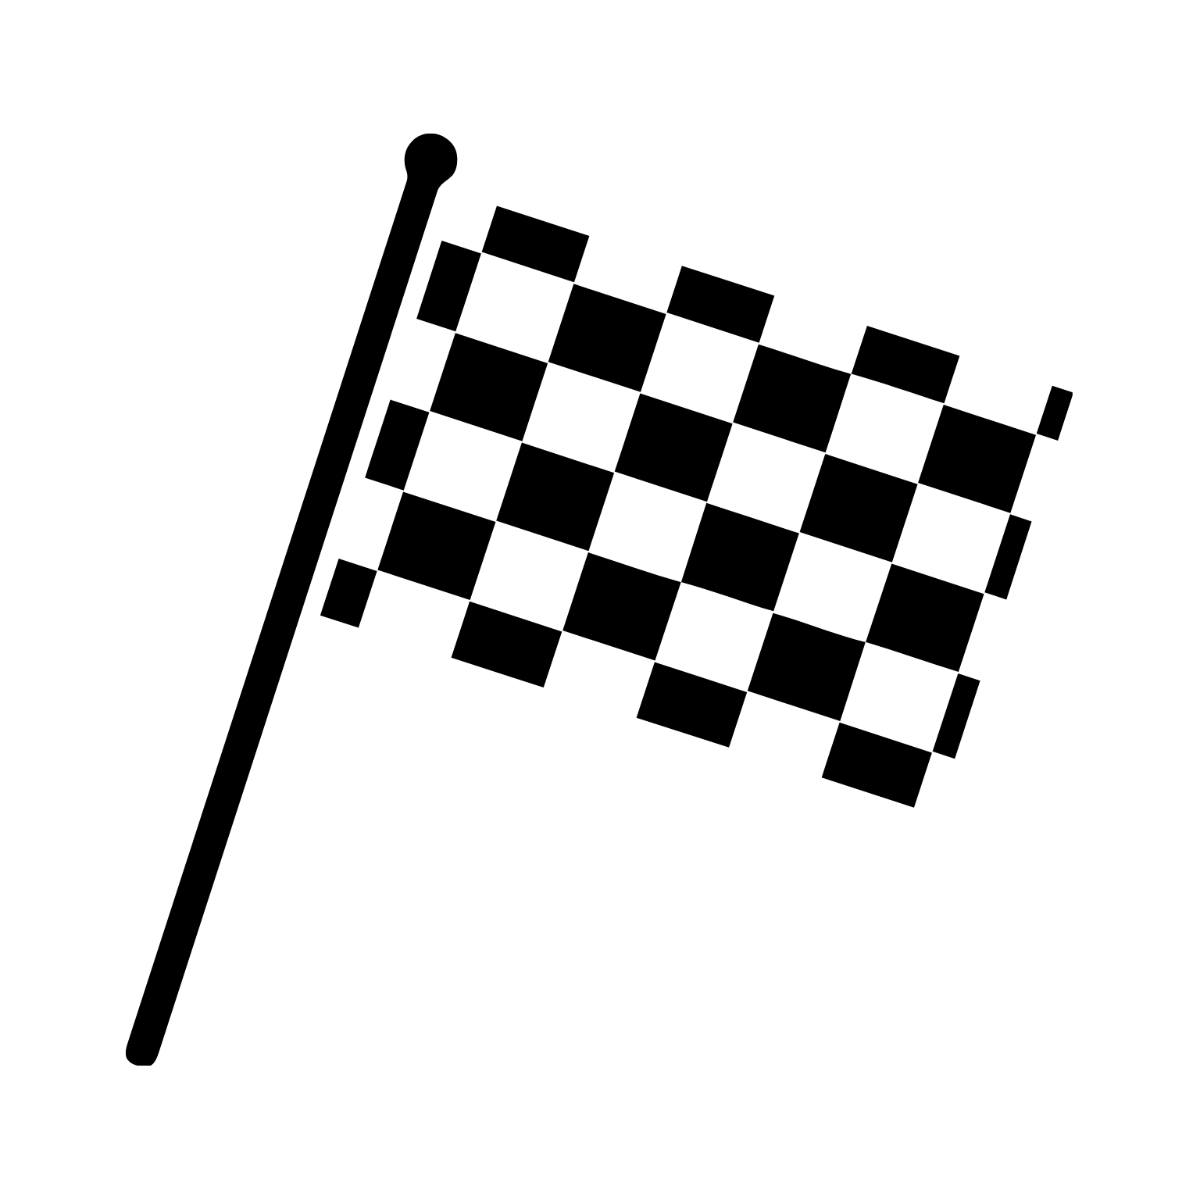 Finish Racing Flag clipart Template